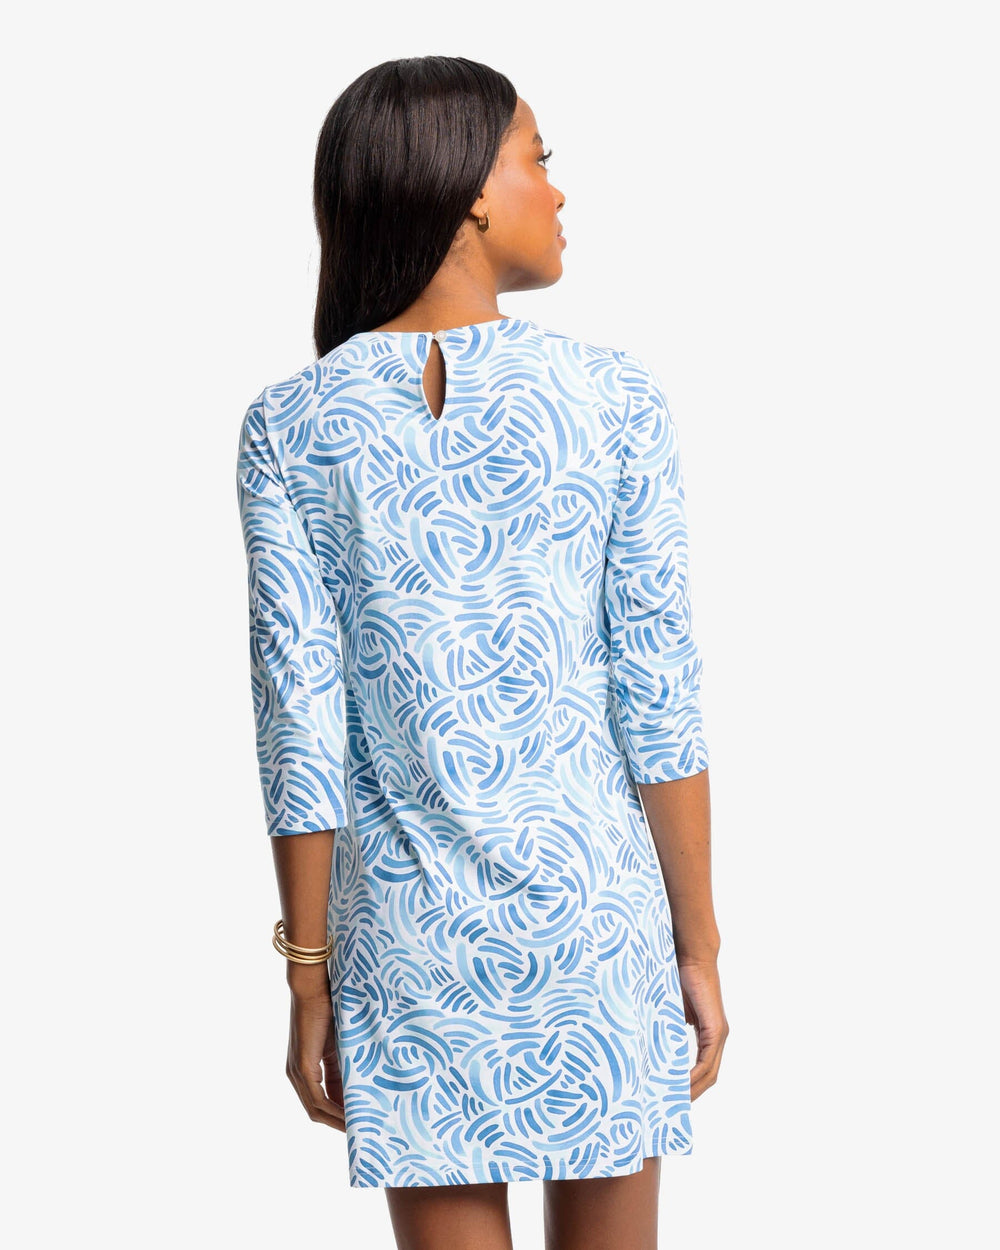 The back view of the Southern Tide Leila Watercolor Whirl Printed Performance Dress by Southern Tide - Atlantic Blue